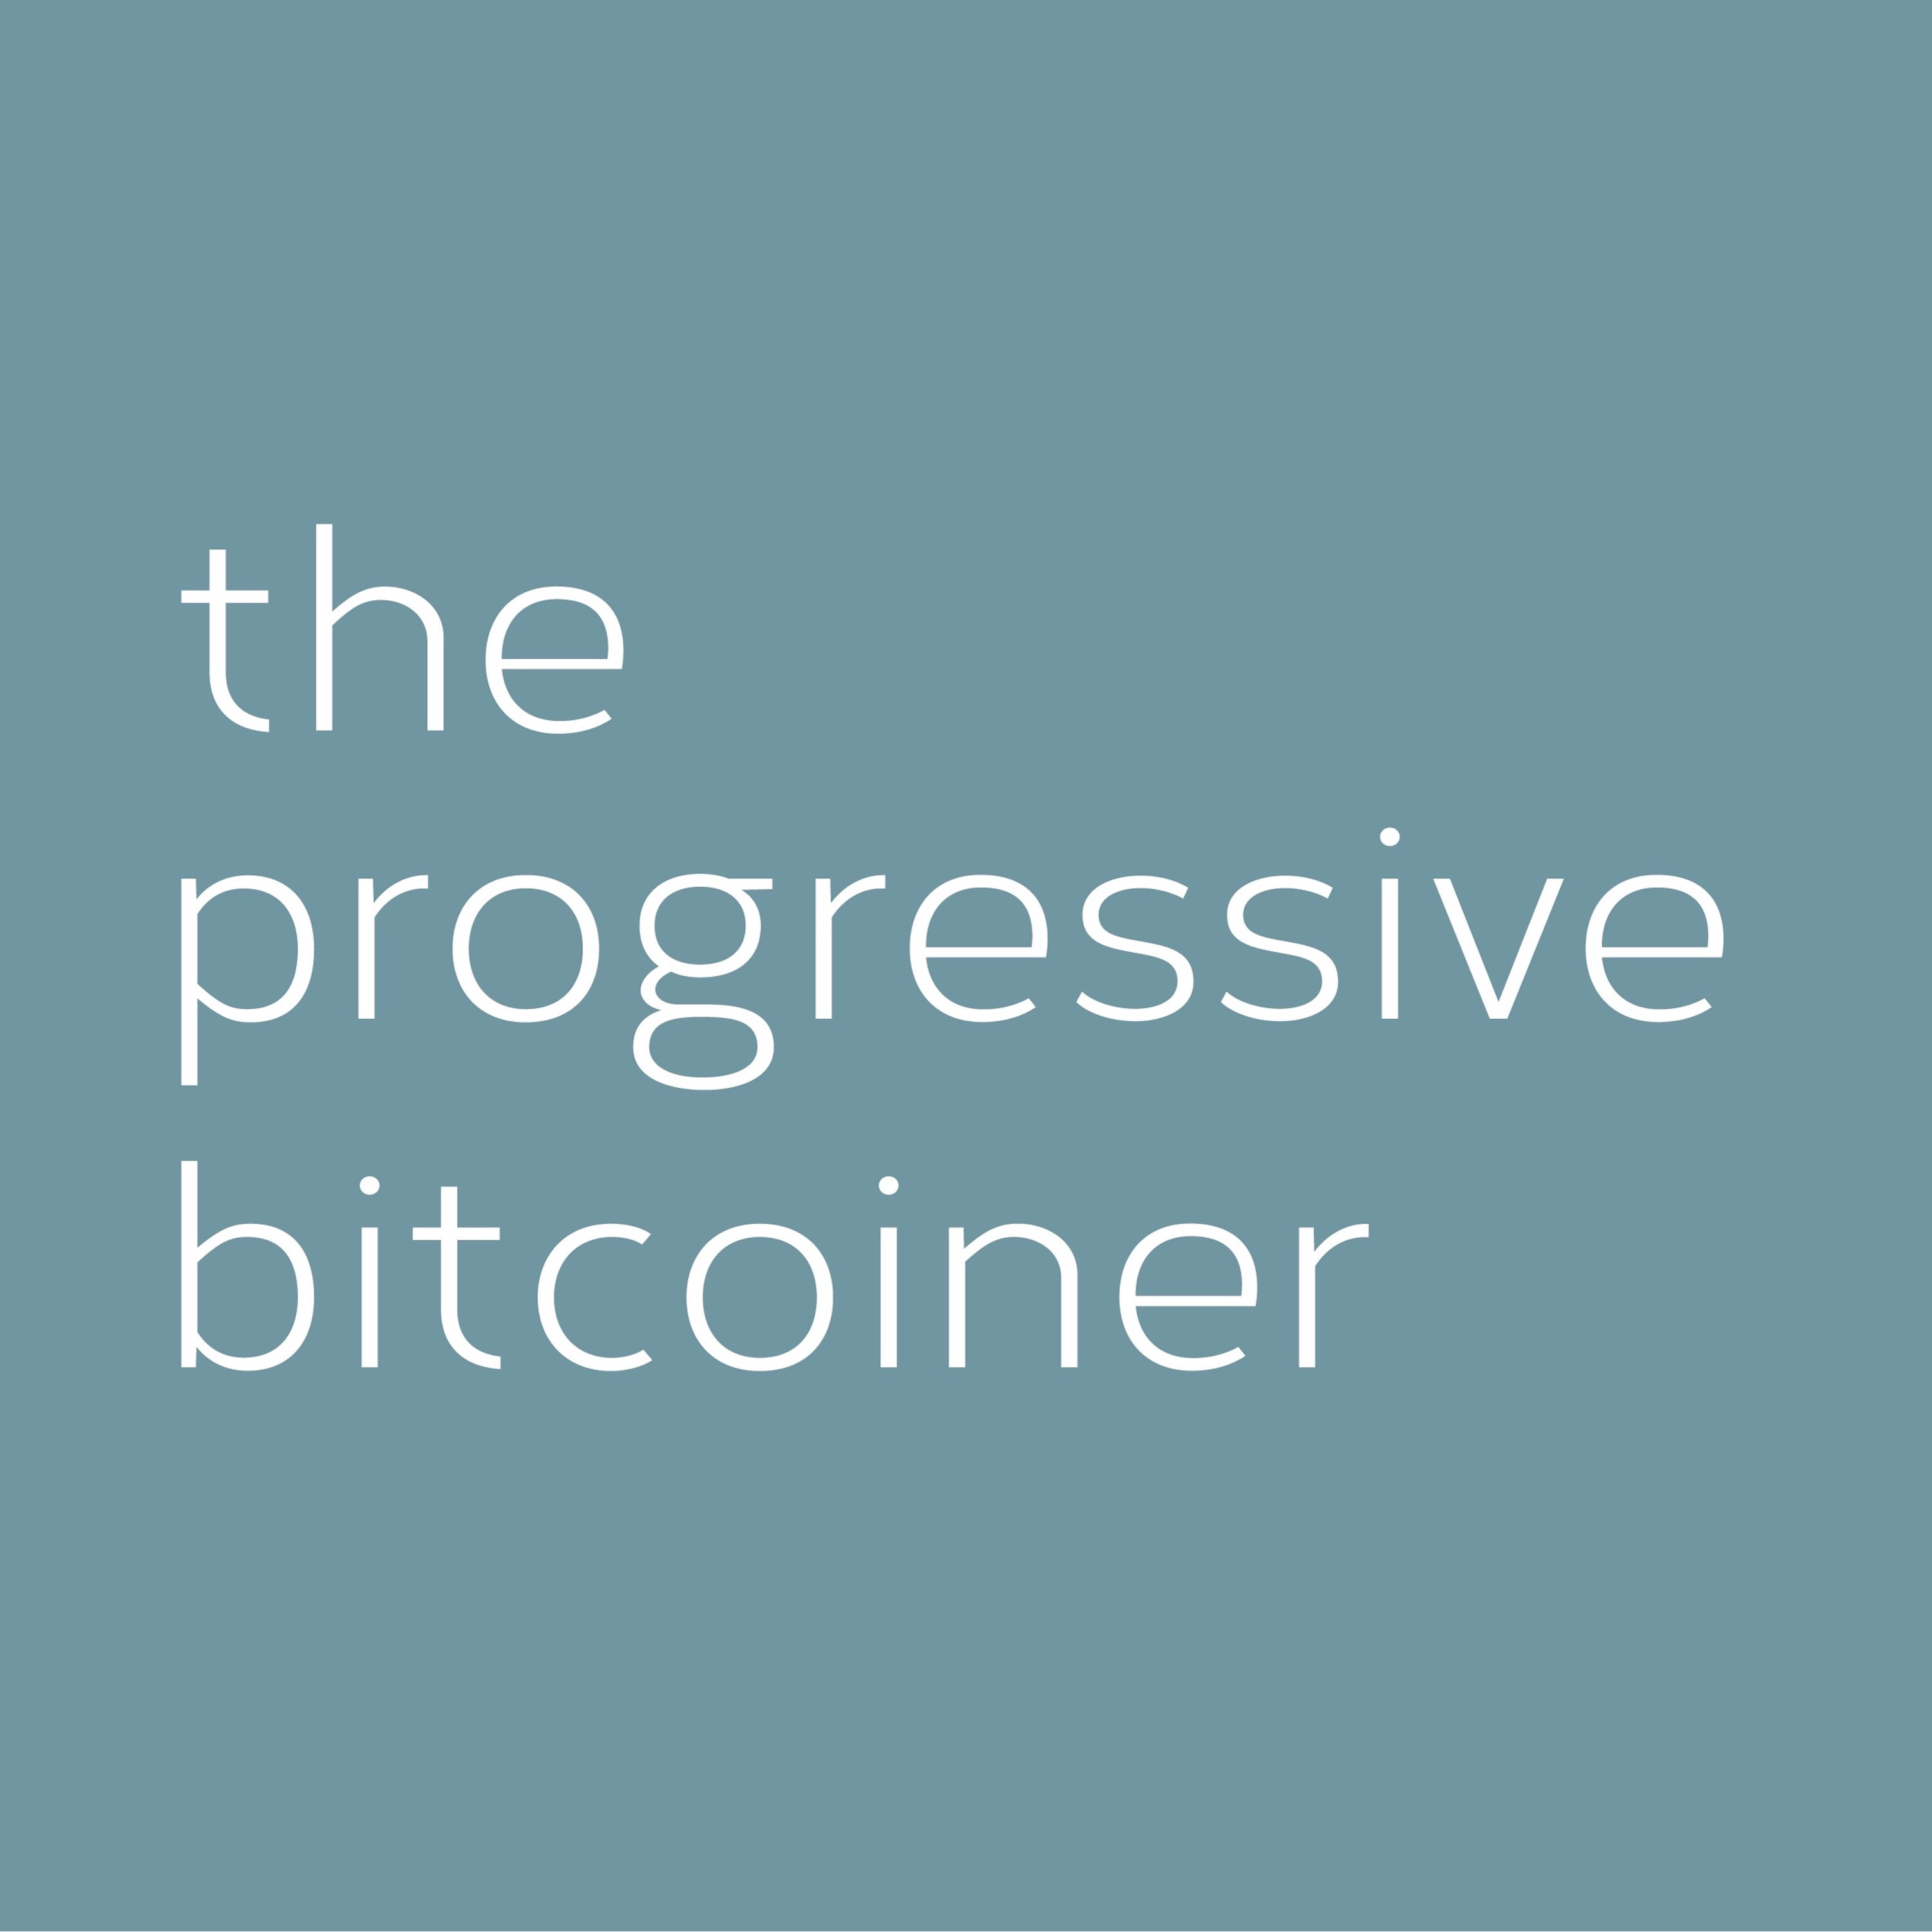 Bitcoin, Philosophy and Greening Bitcoin with Incentive Offsets